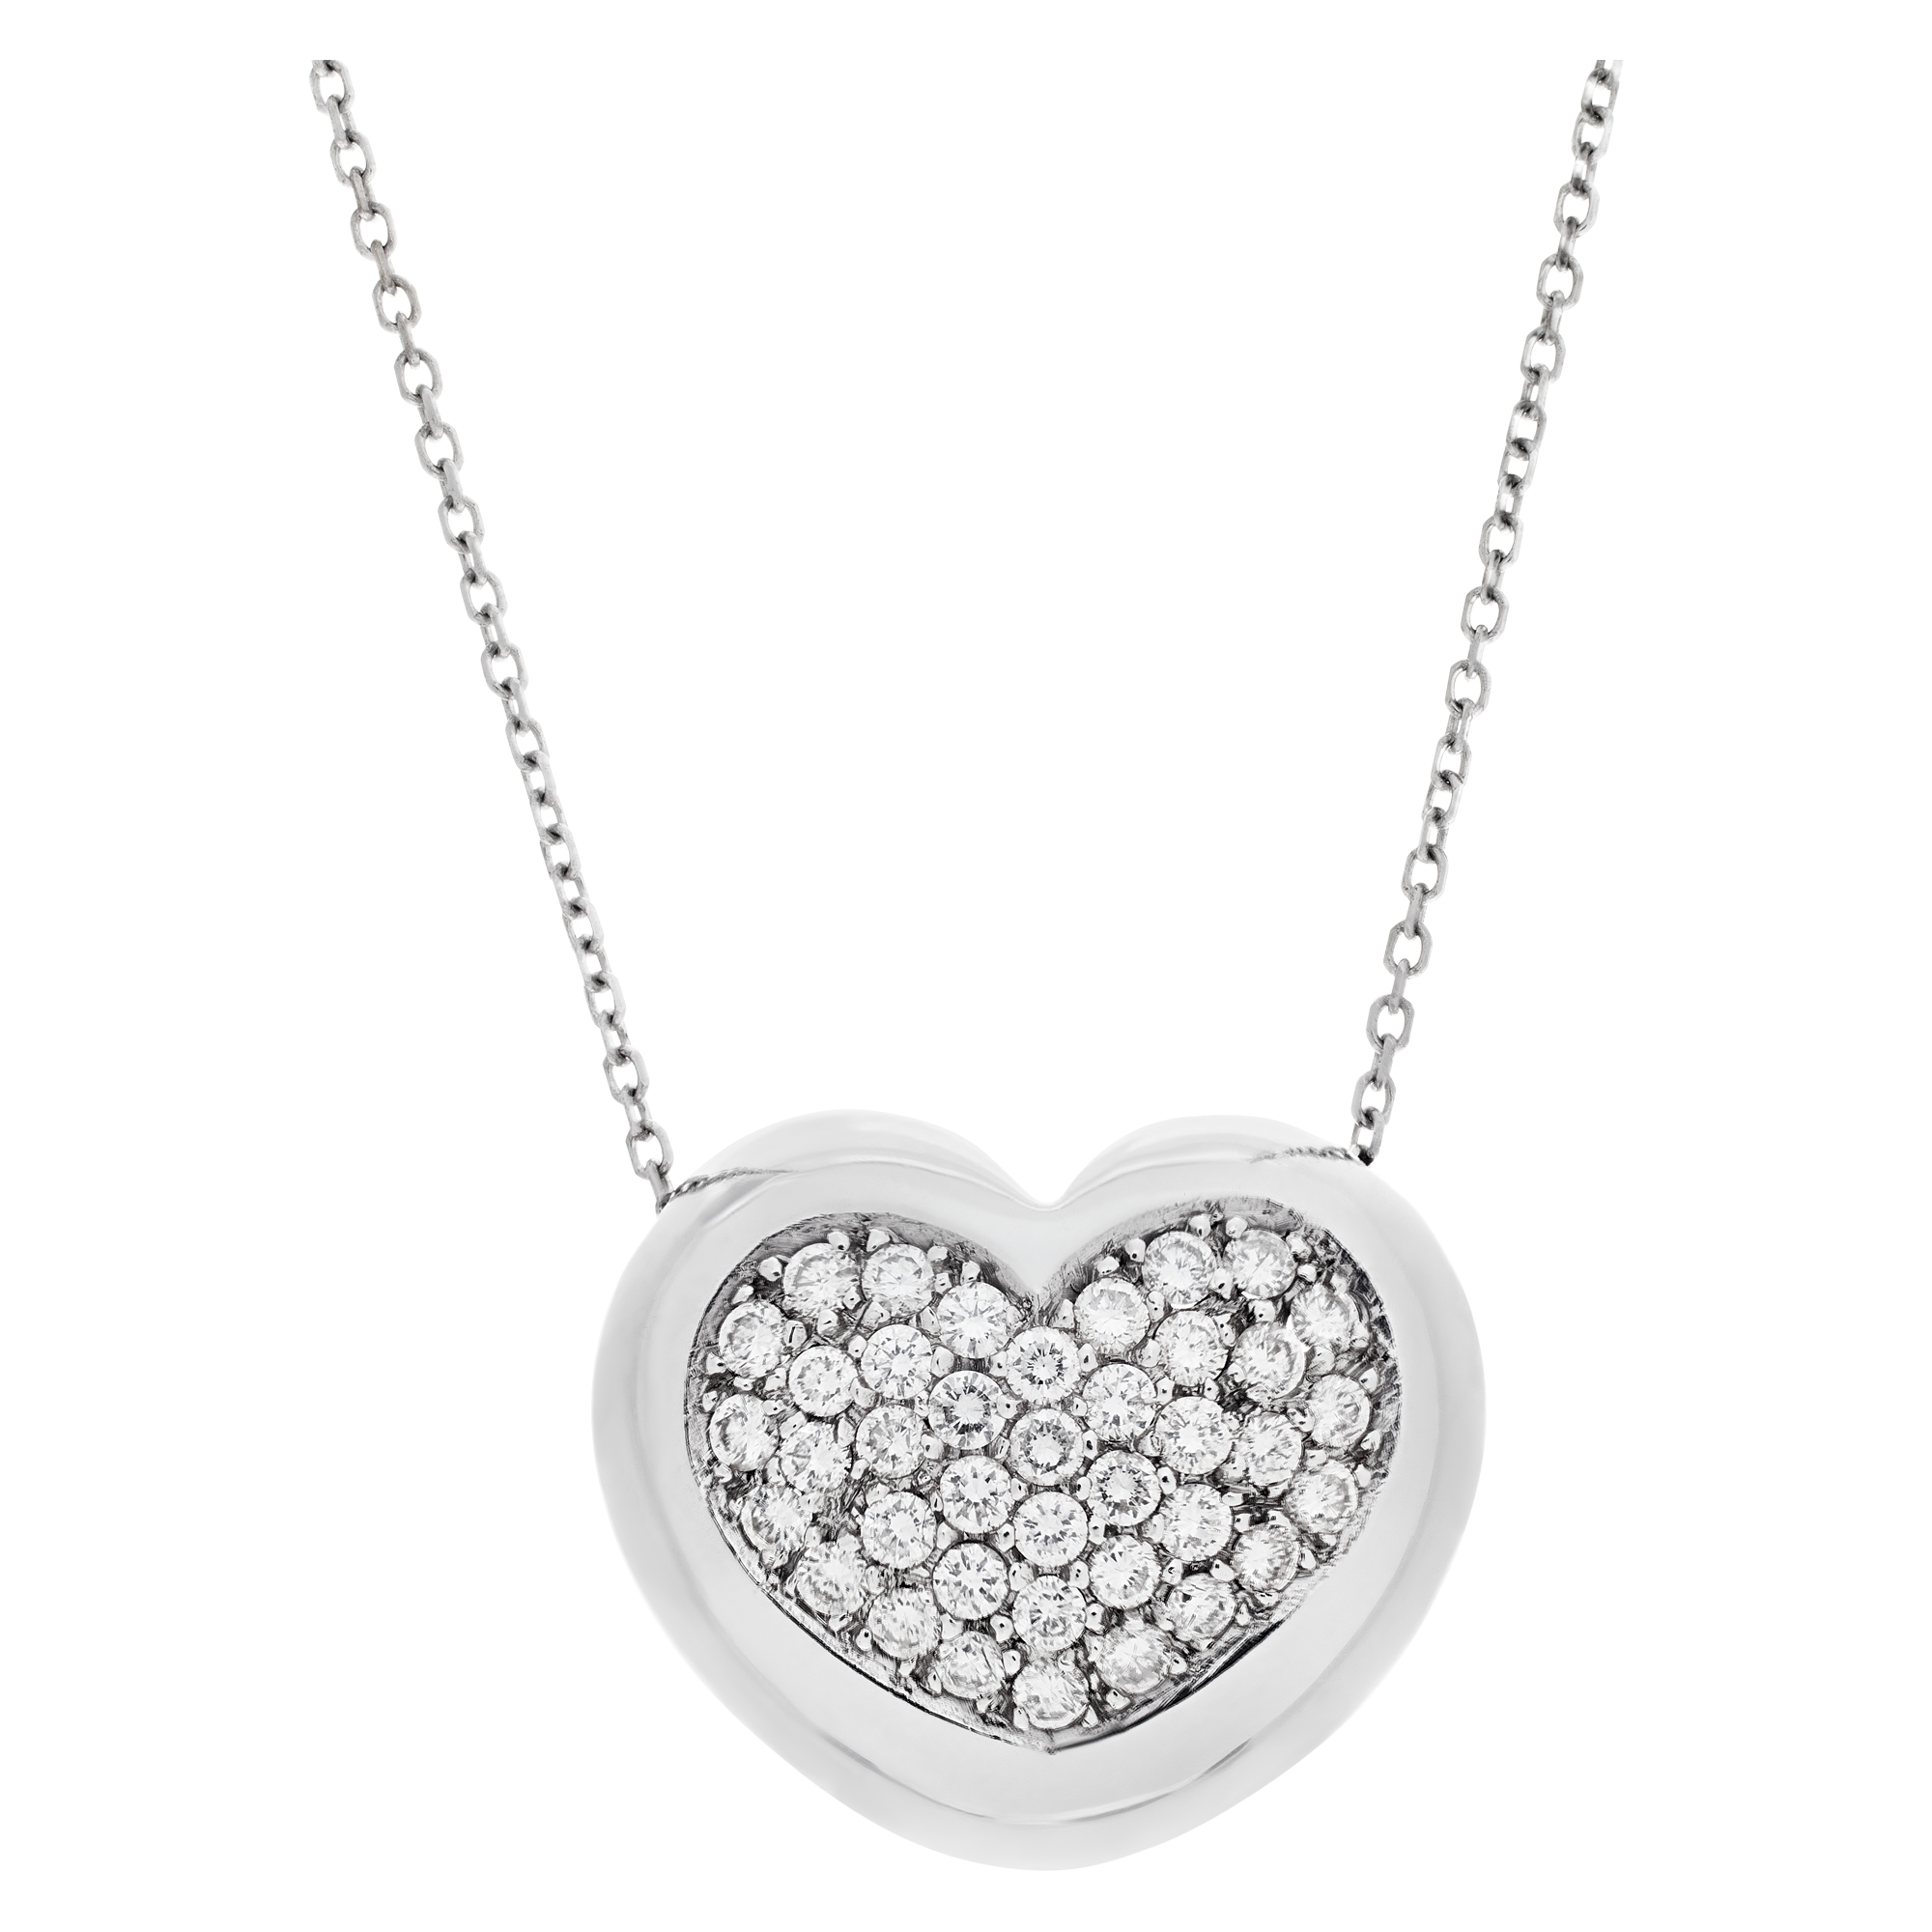 Pave diamond heart pendant and chain